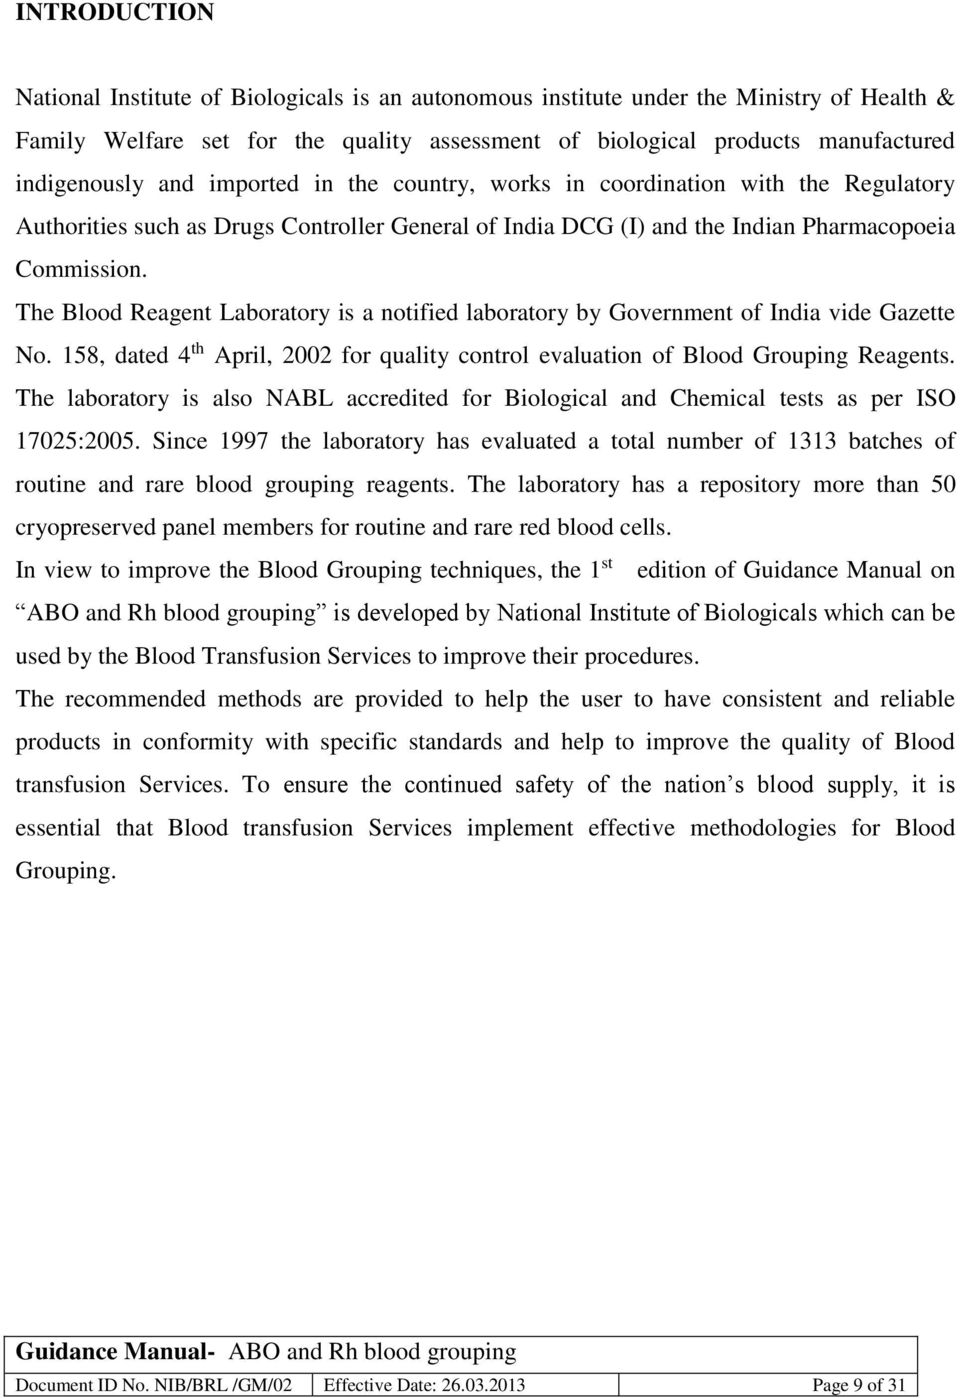 The Blood Reagent Laboratory is a notified laboratory by Government of India vide Gazette No. 158, dated 4 th April, 2002 for quality control evaluation of Blood Grouping Reagents.